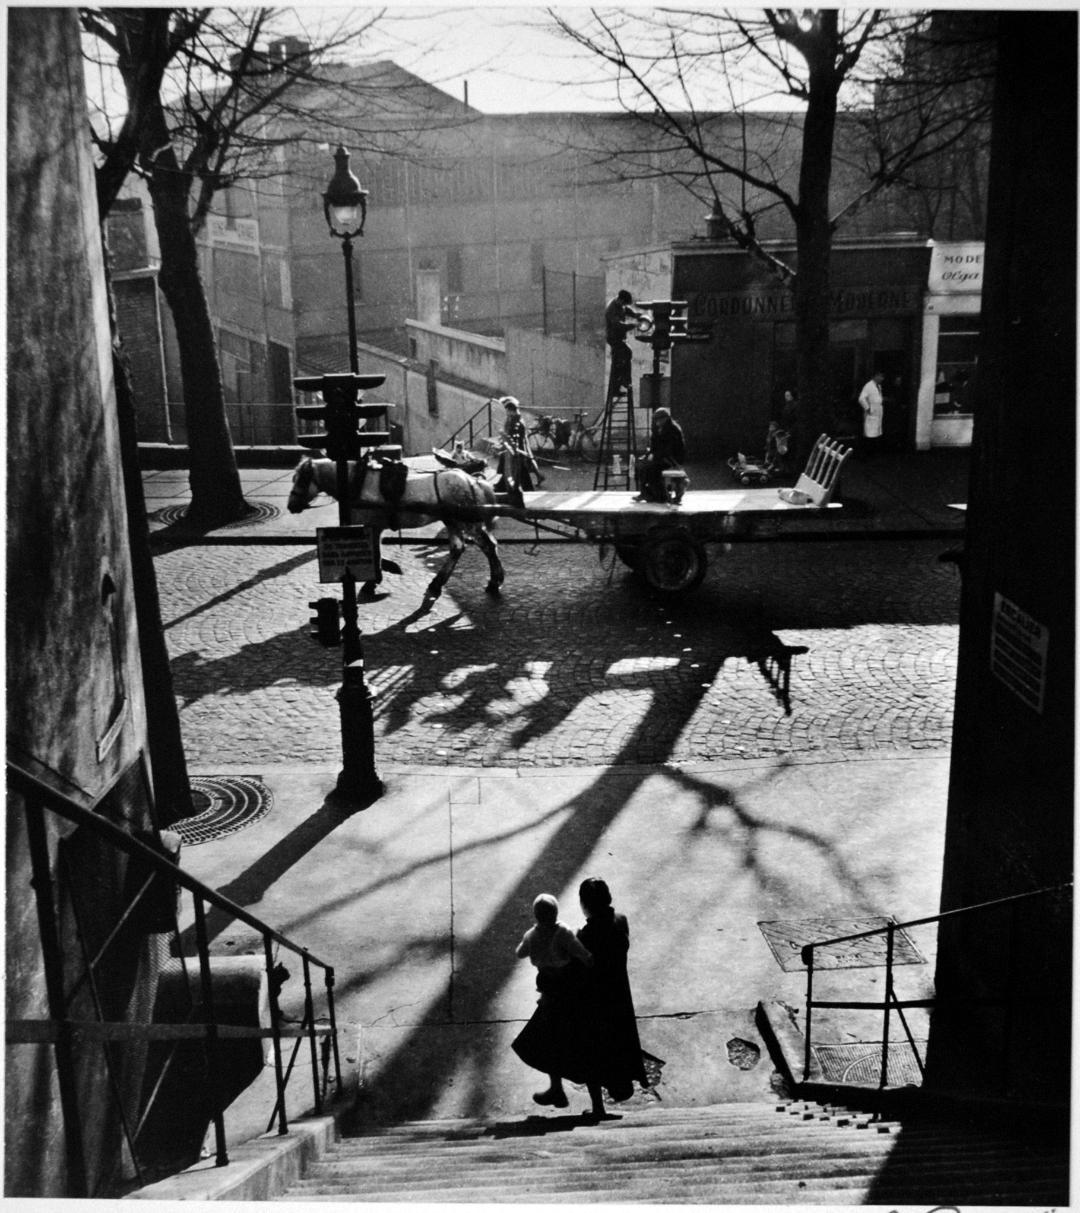 Avenue Simon Bolivar - Willy Ronis, 20th Century, French Humanist Photography